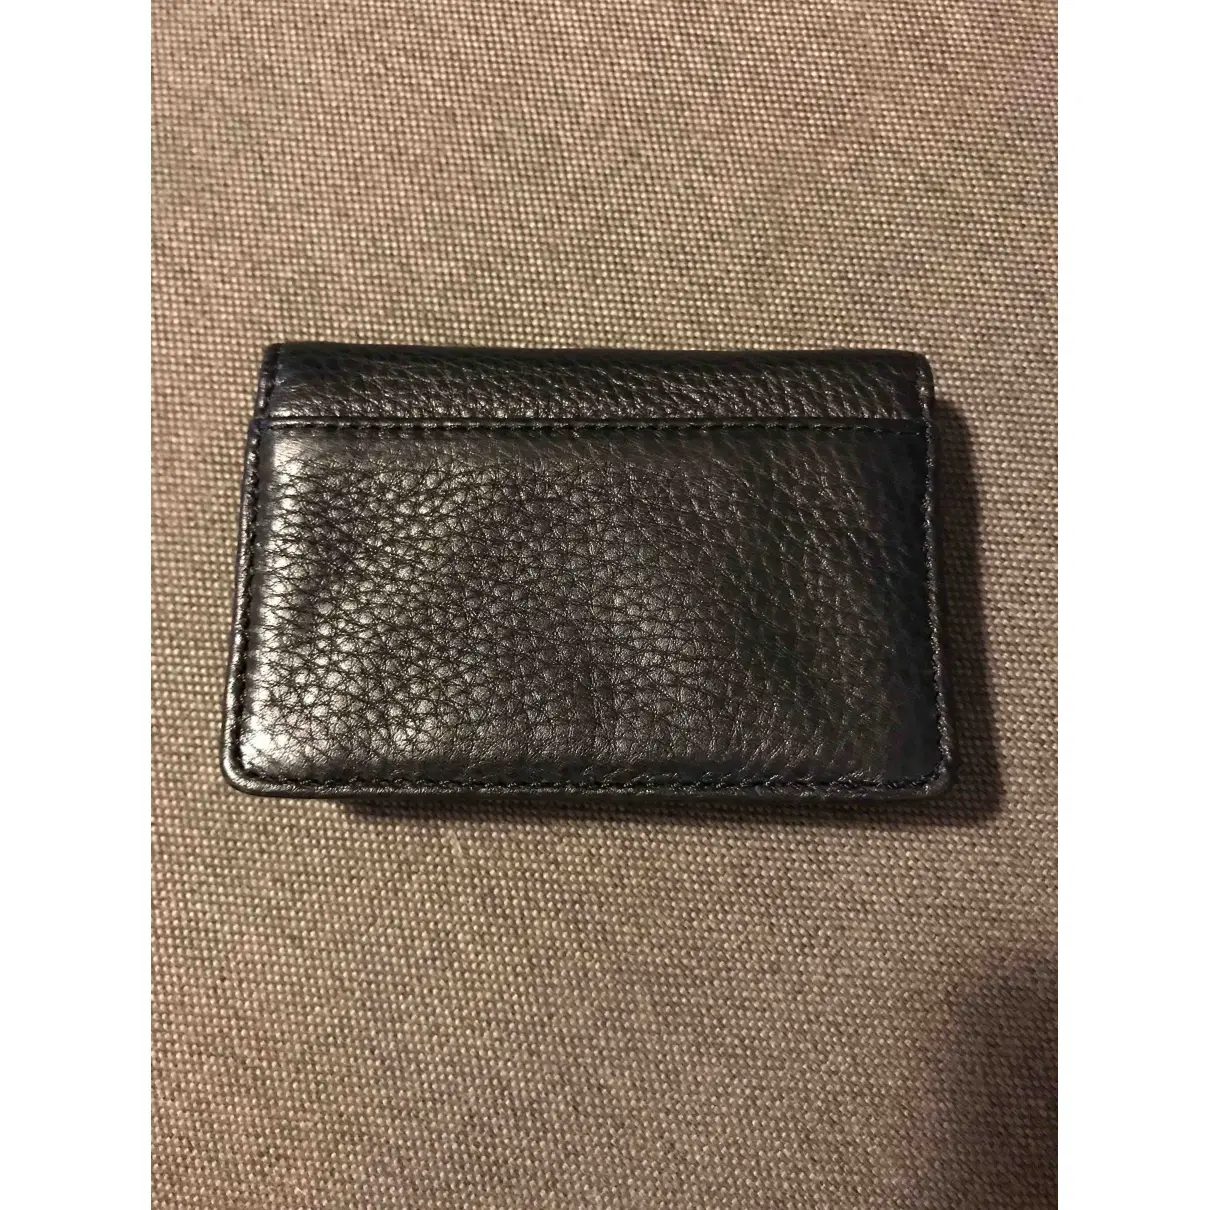 Buy Tory Burch Leather wallet online